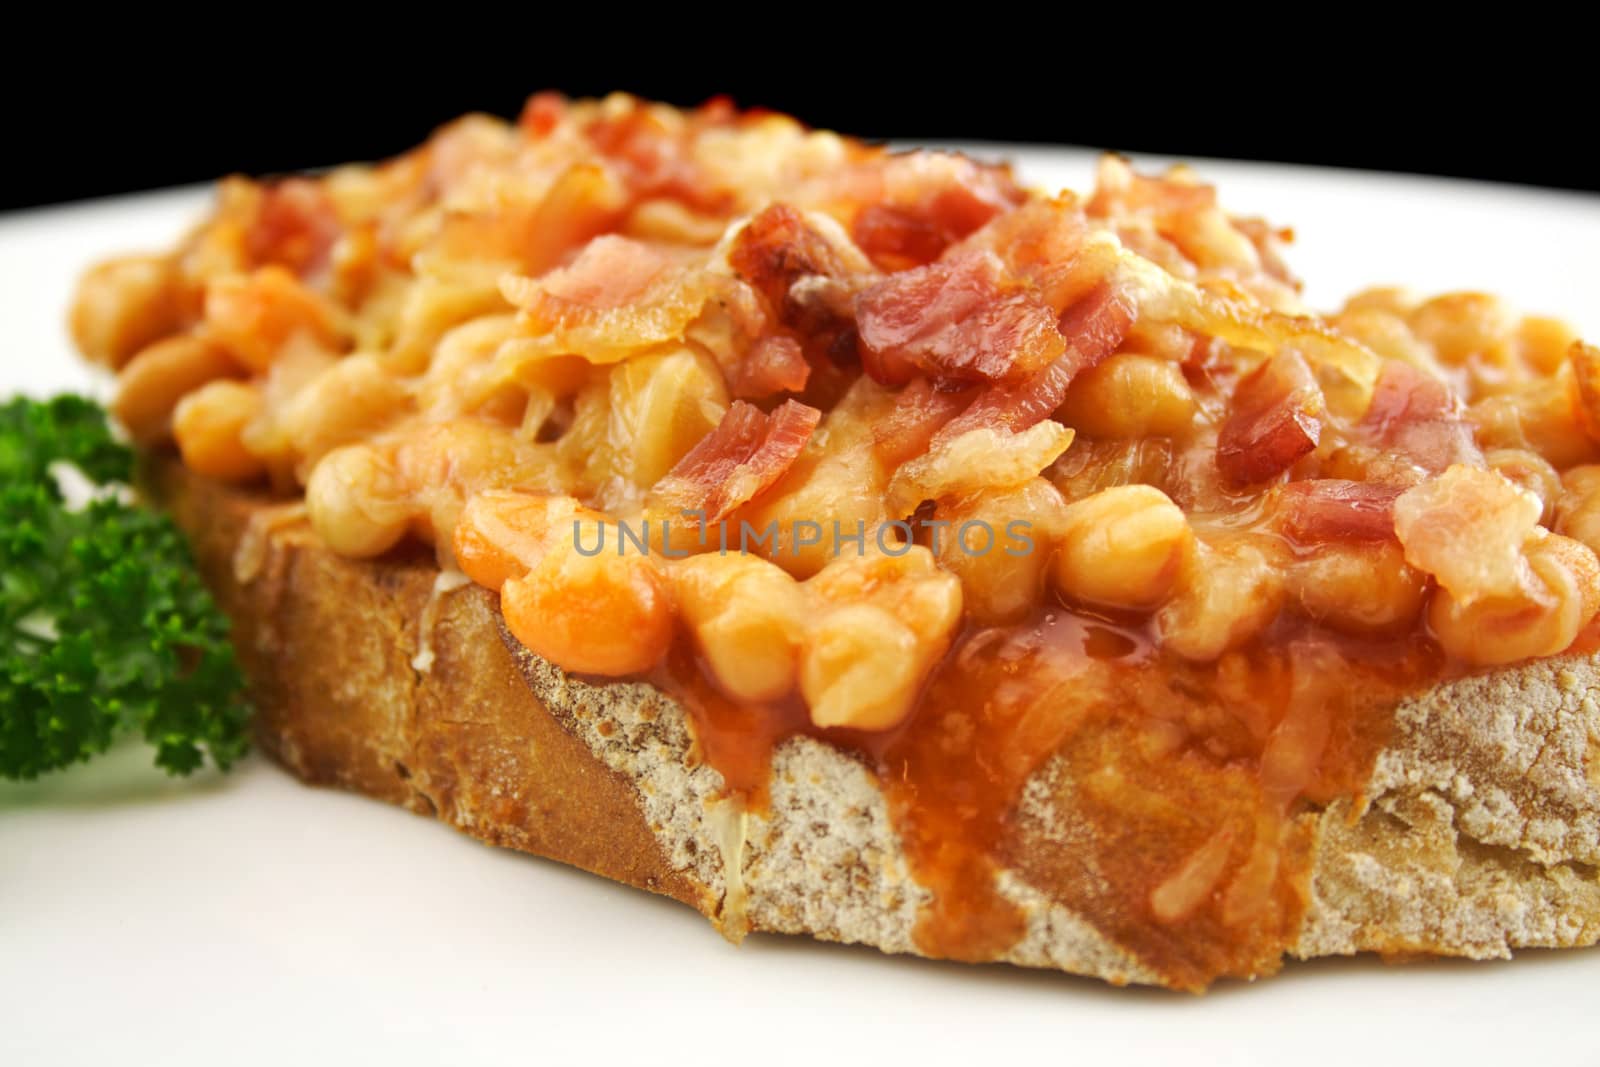 Bacon And Baked Beans by jabiru